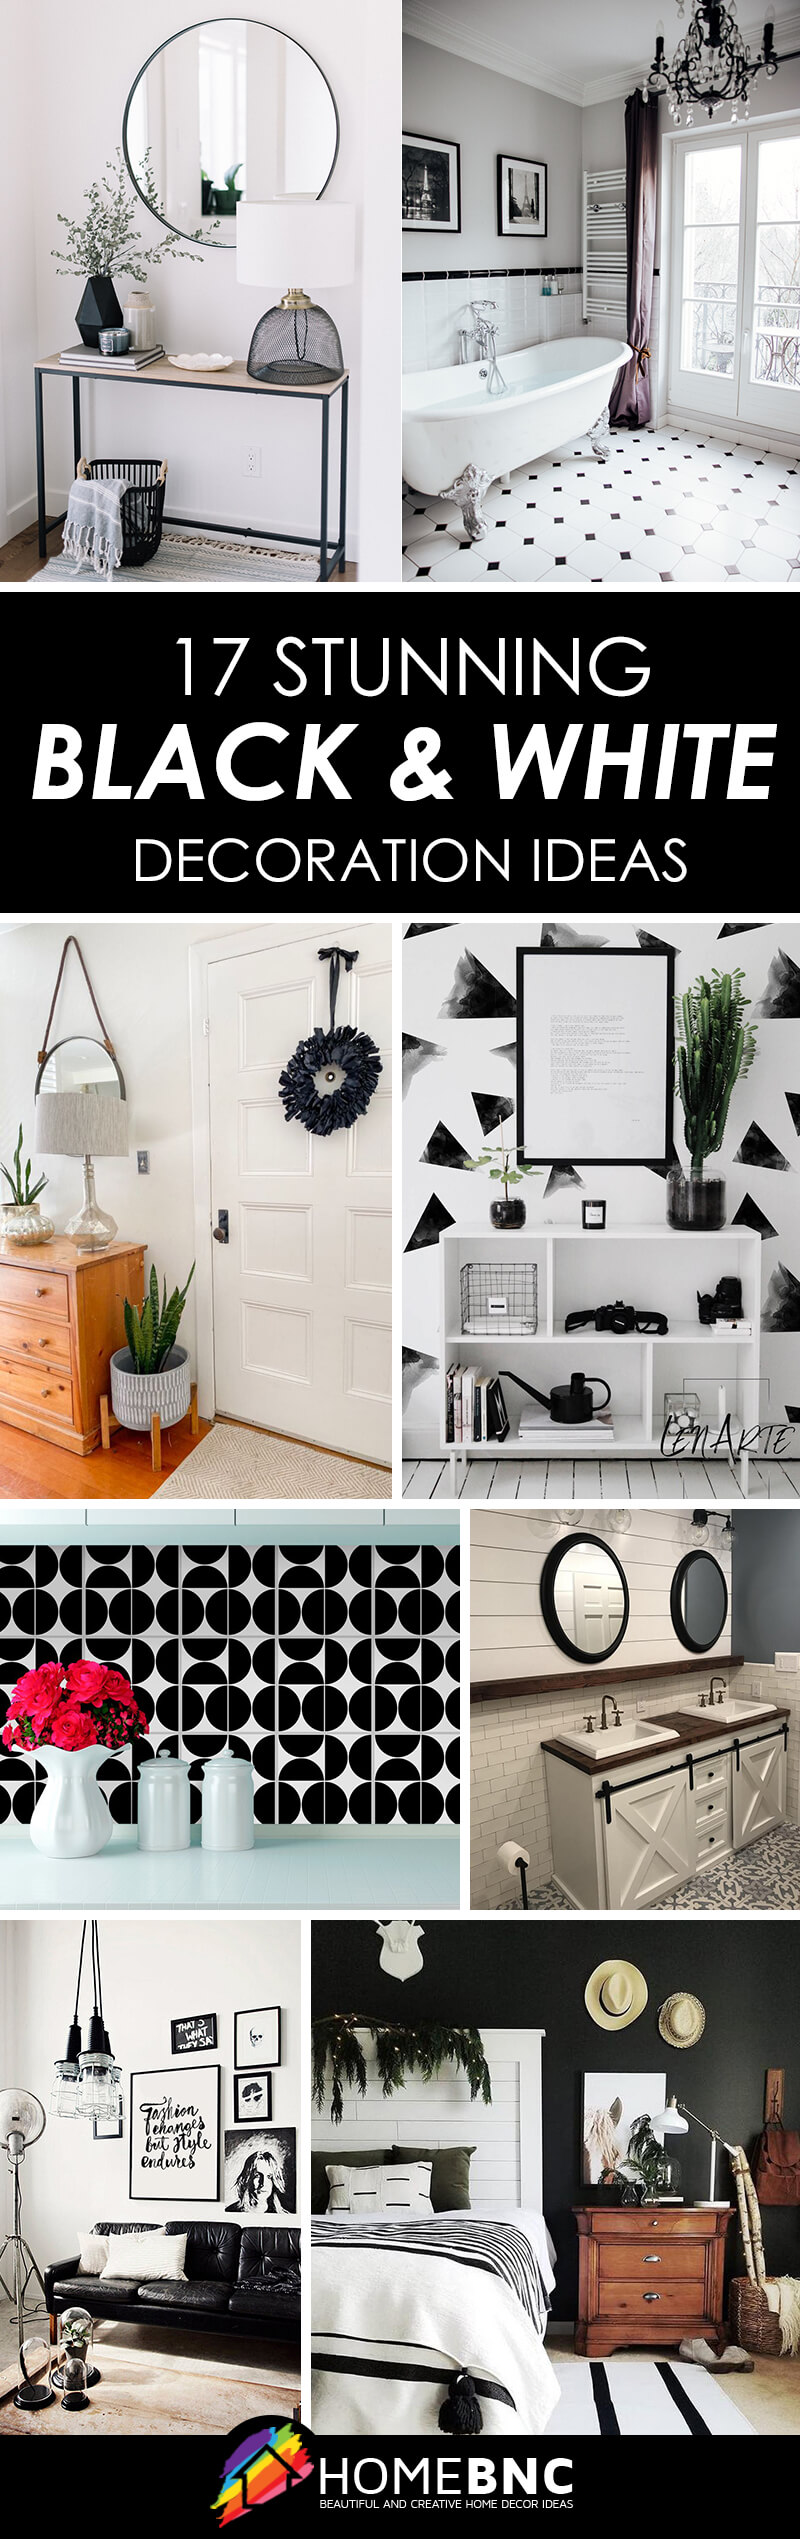 Best Black and White Home Decor Ideas and Designs